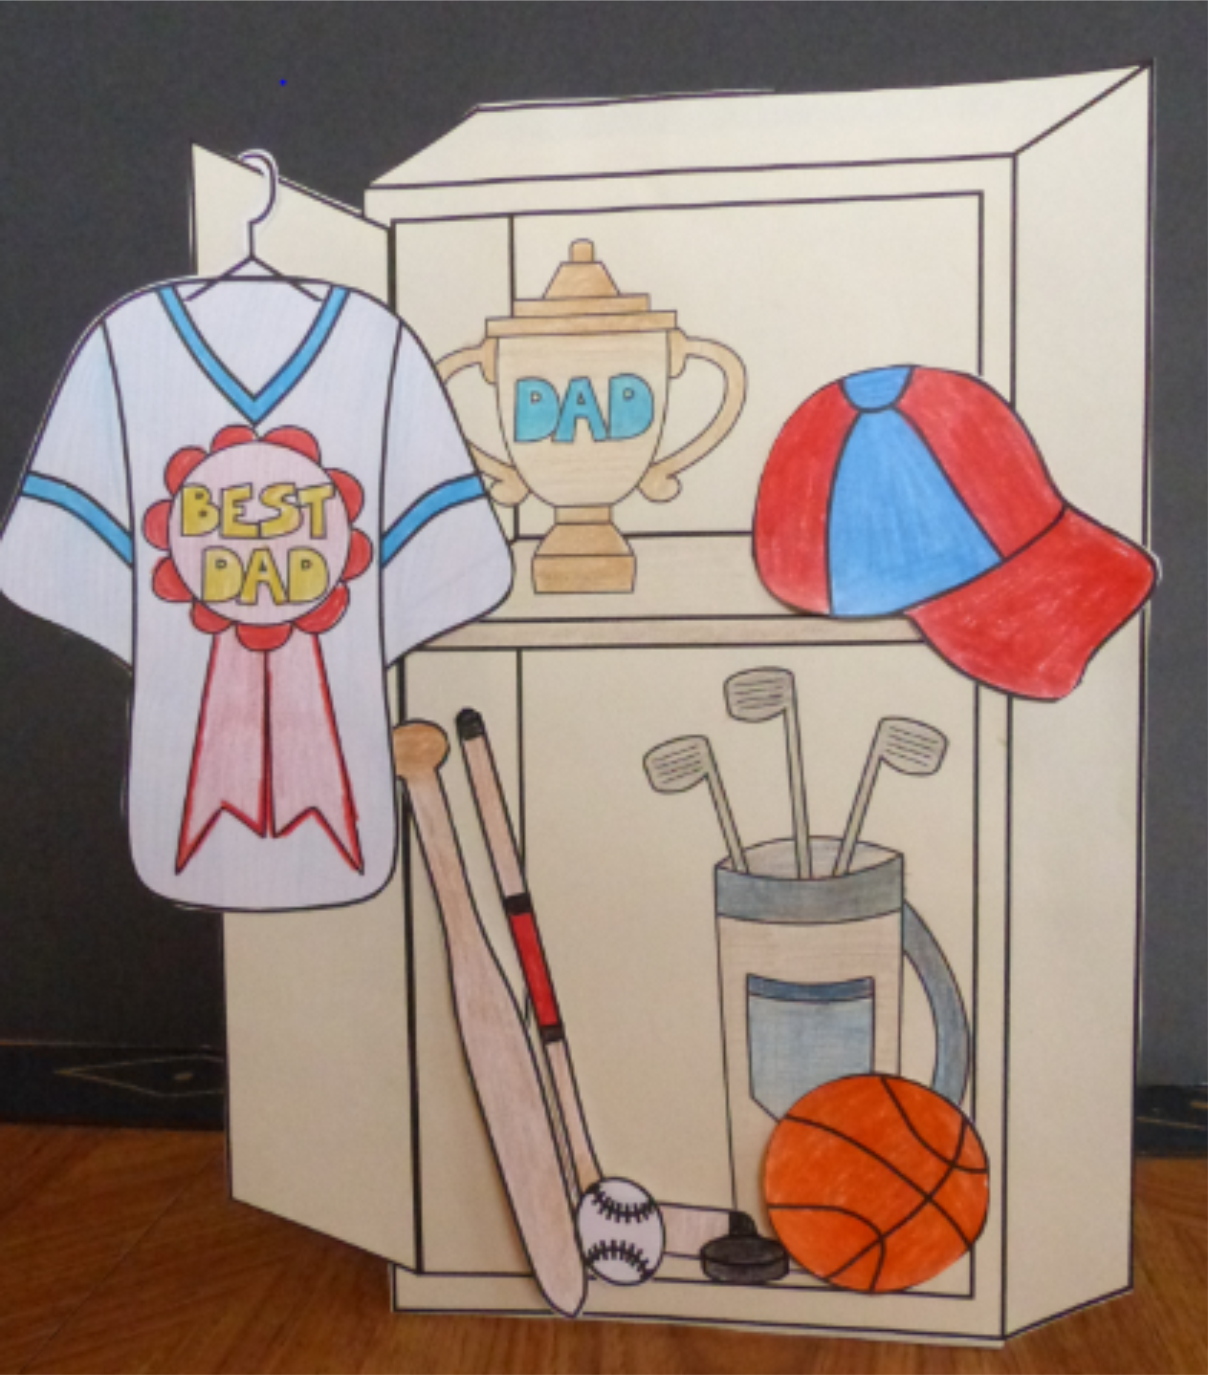 Father's Day Crafts - Build Dad a Sports Locker